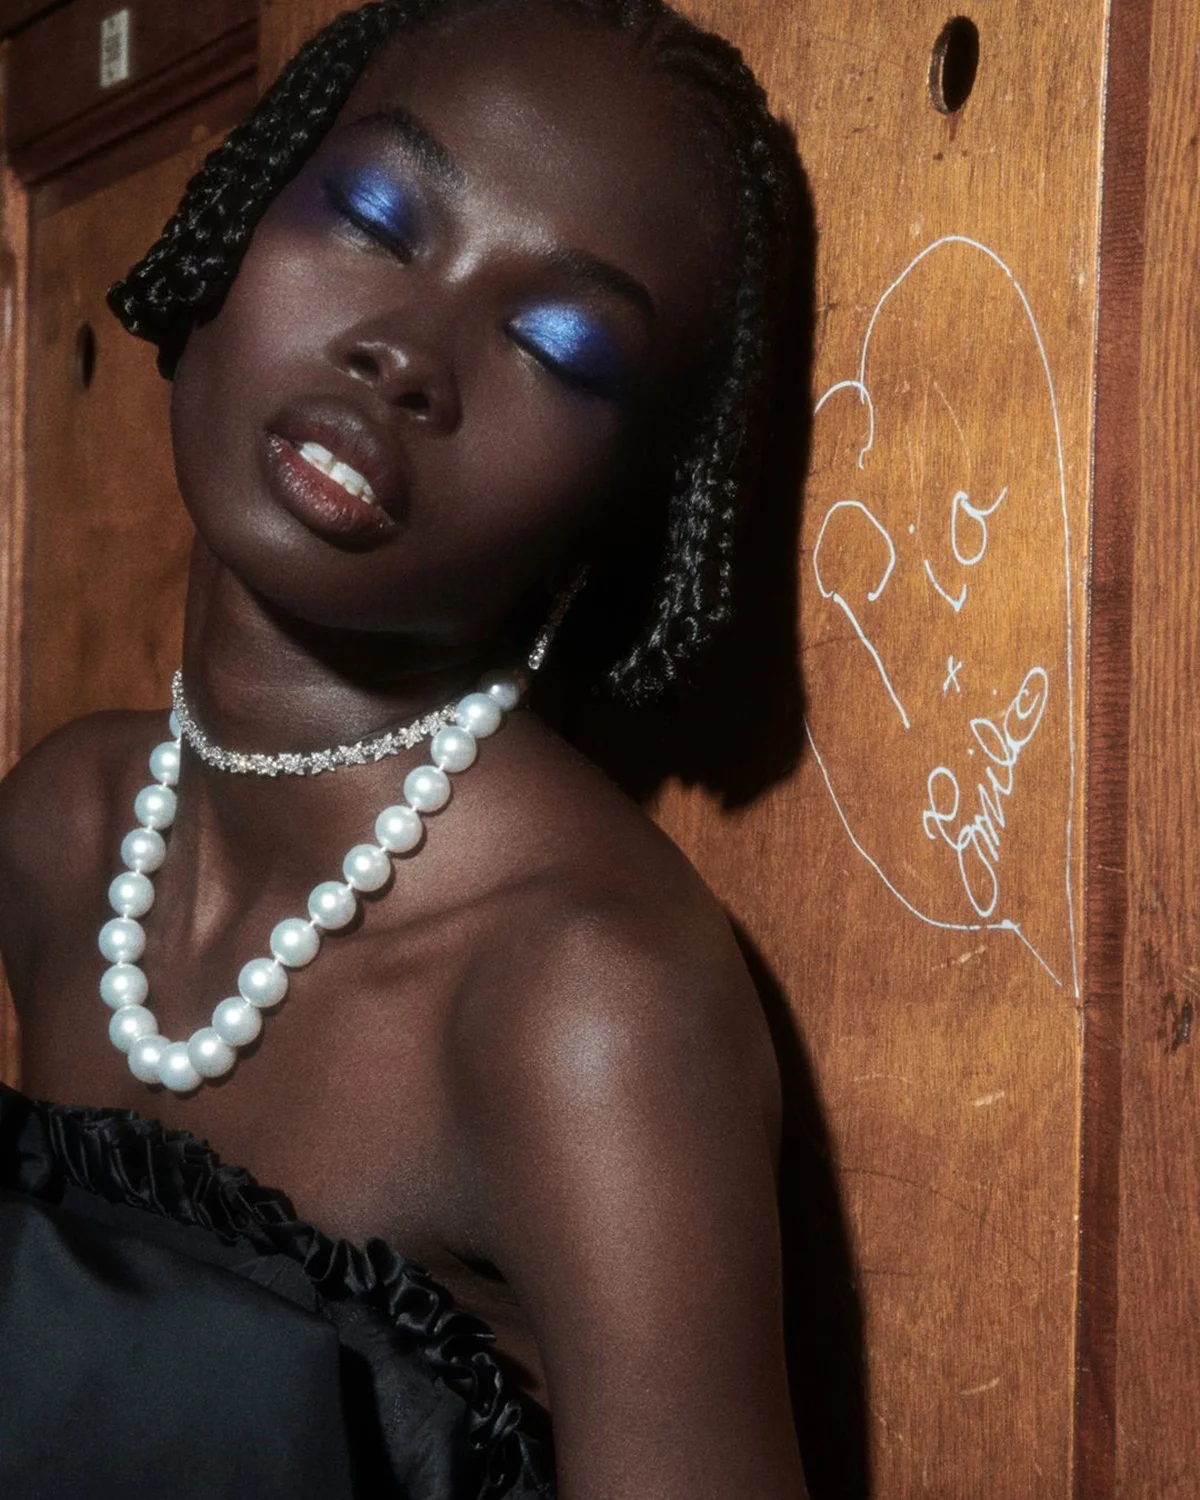 ''Sleep and Silver'' by Valentin Herfray for M Le magazine du Monde March 26th, 2022